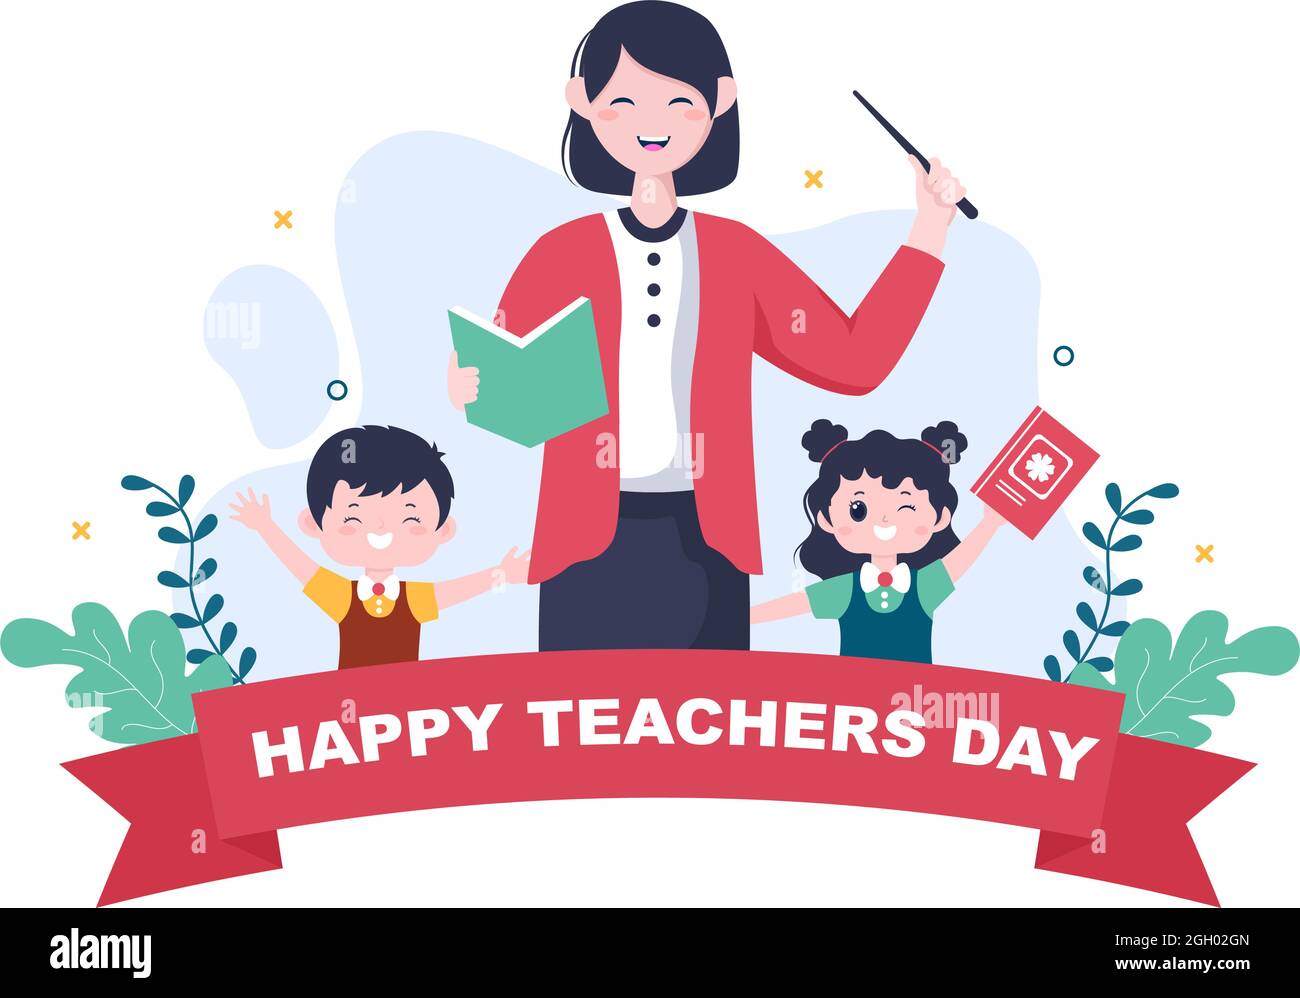 Happy Teacher's Day Background Vector Illustration with ...